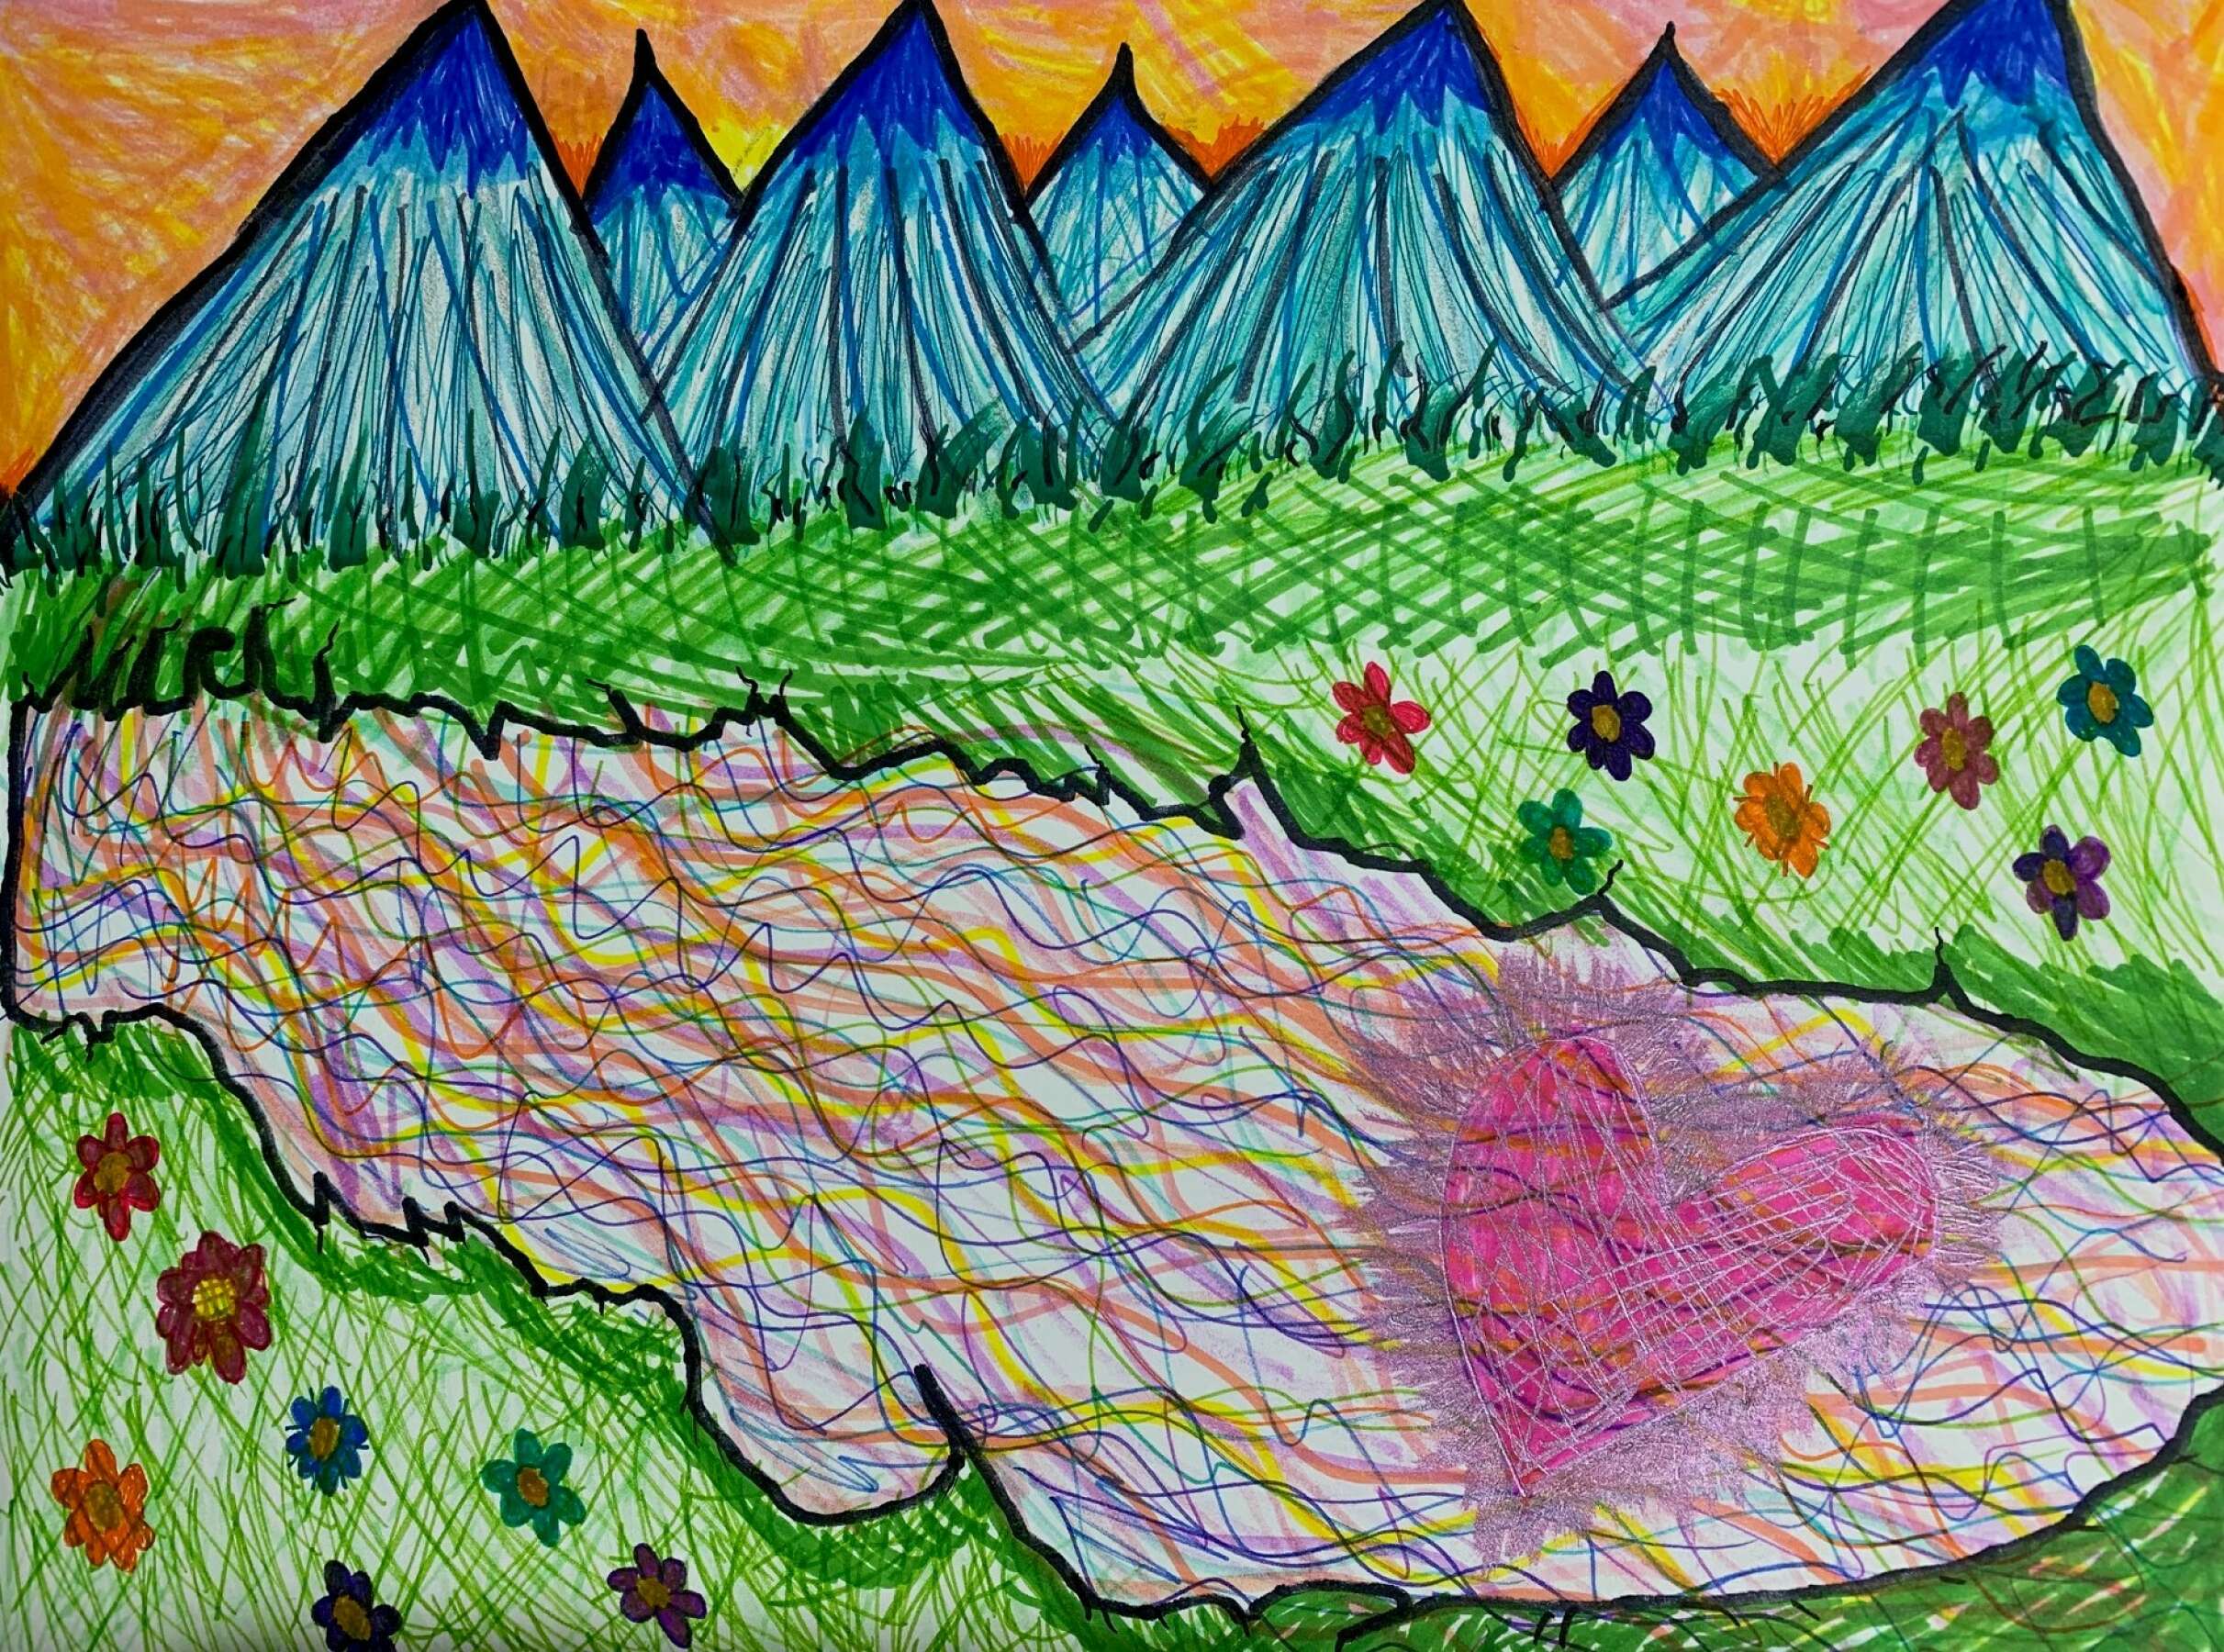 River of Love – Pen, 9 X 12 inches